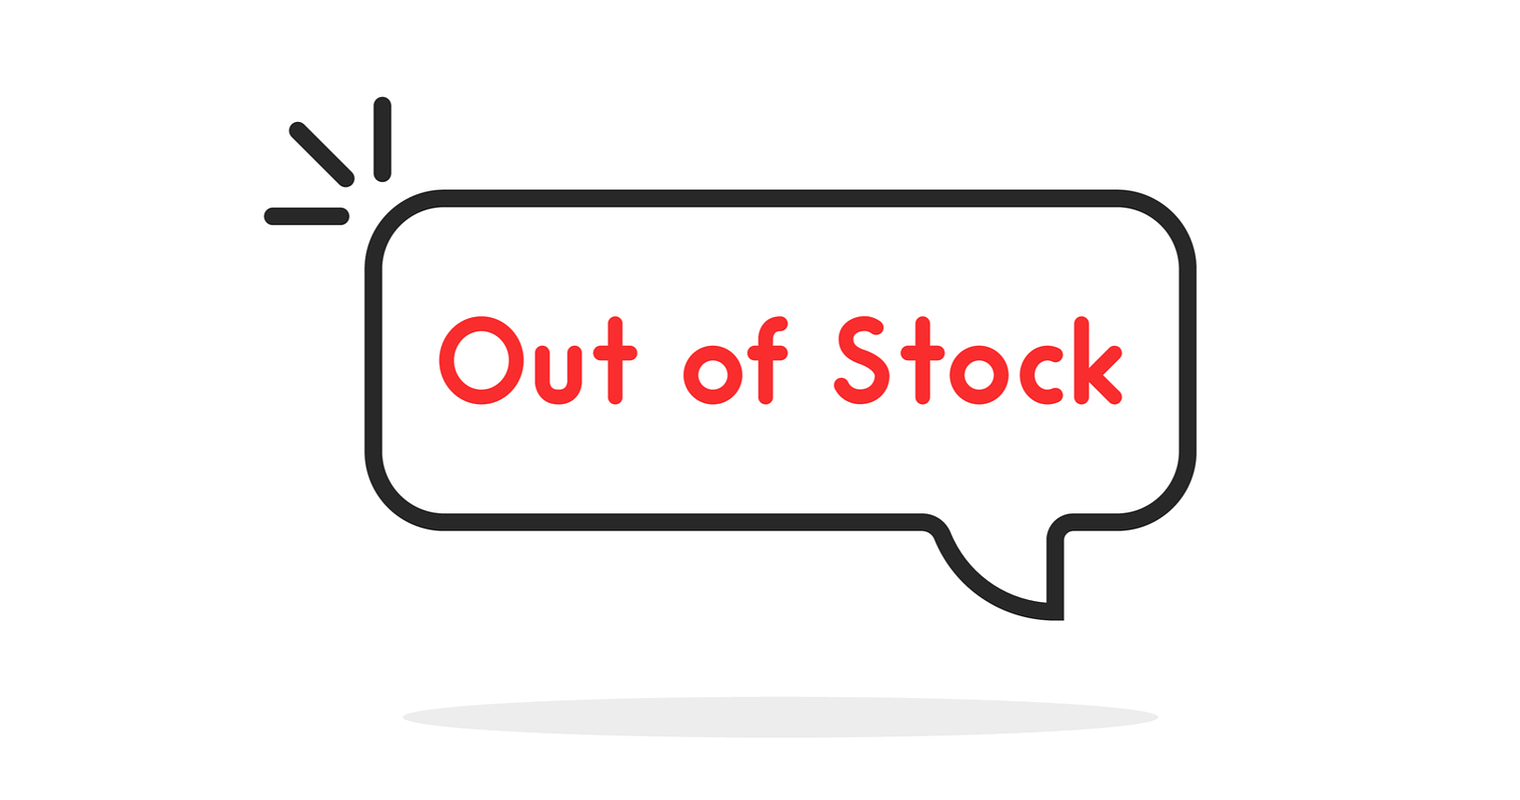 How To Handle Out Of Stock Products On Ecommerce Platforms